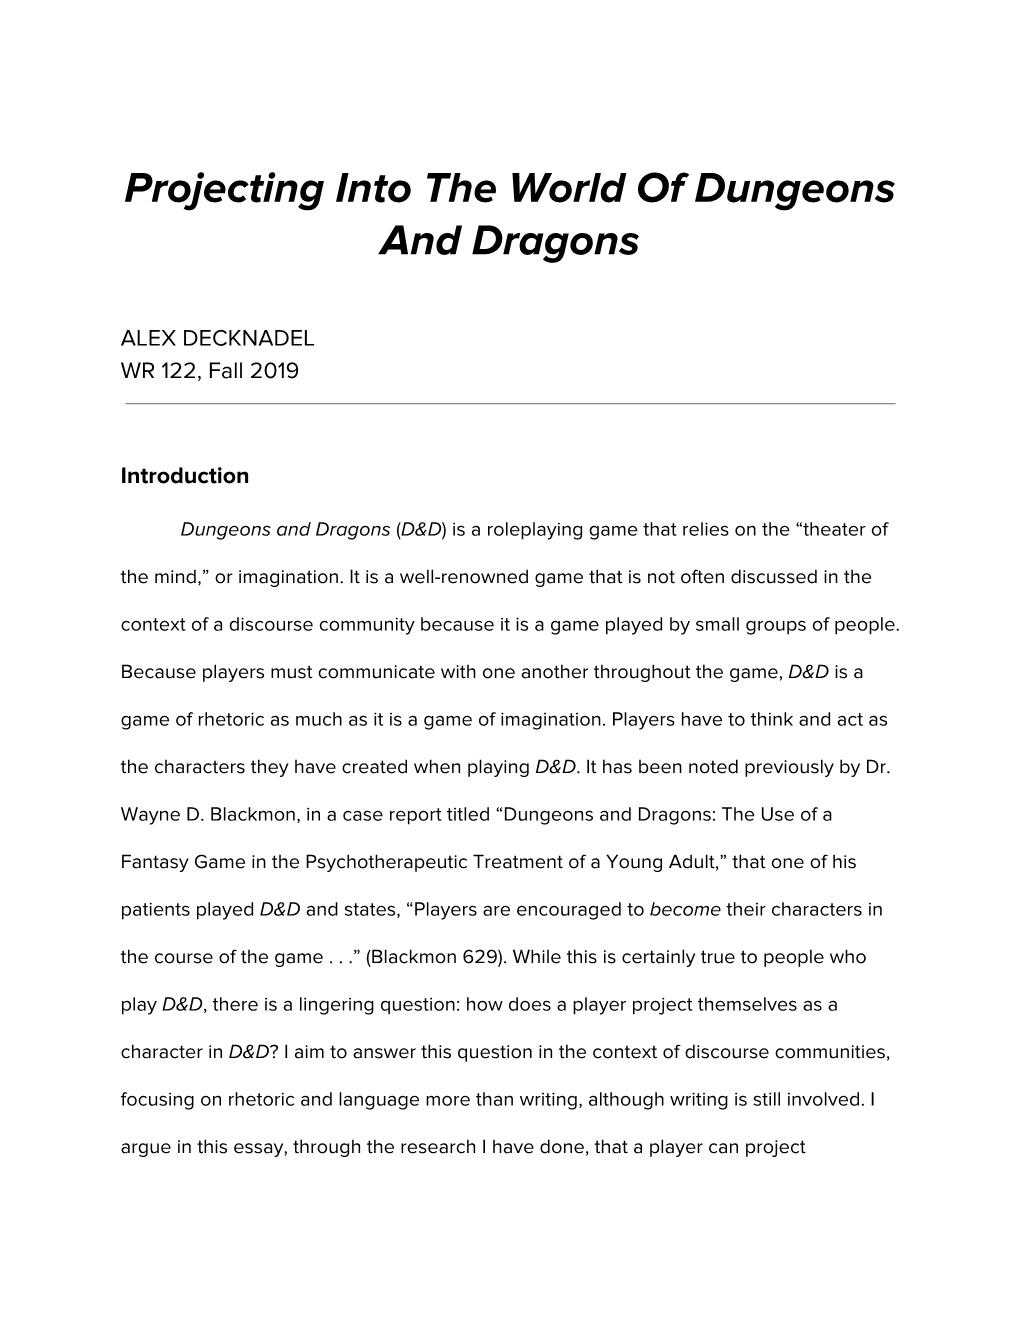 Projecting Into the World of Dungeons and Dragons